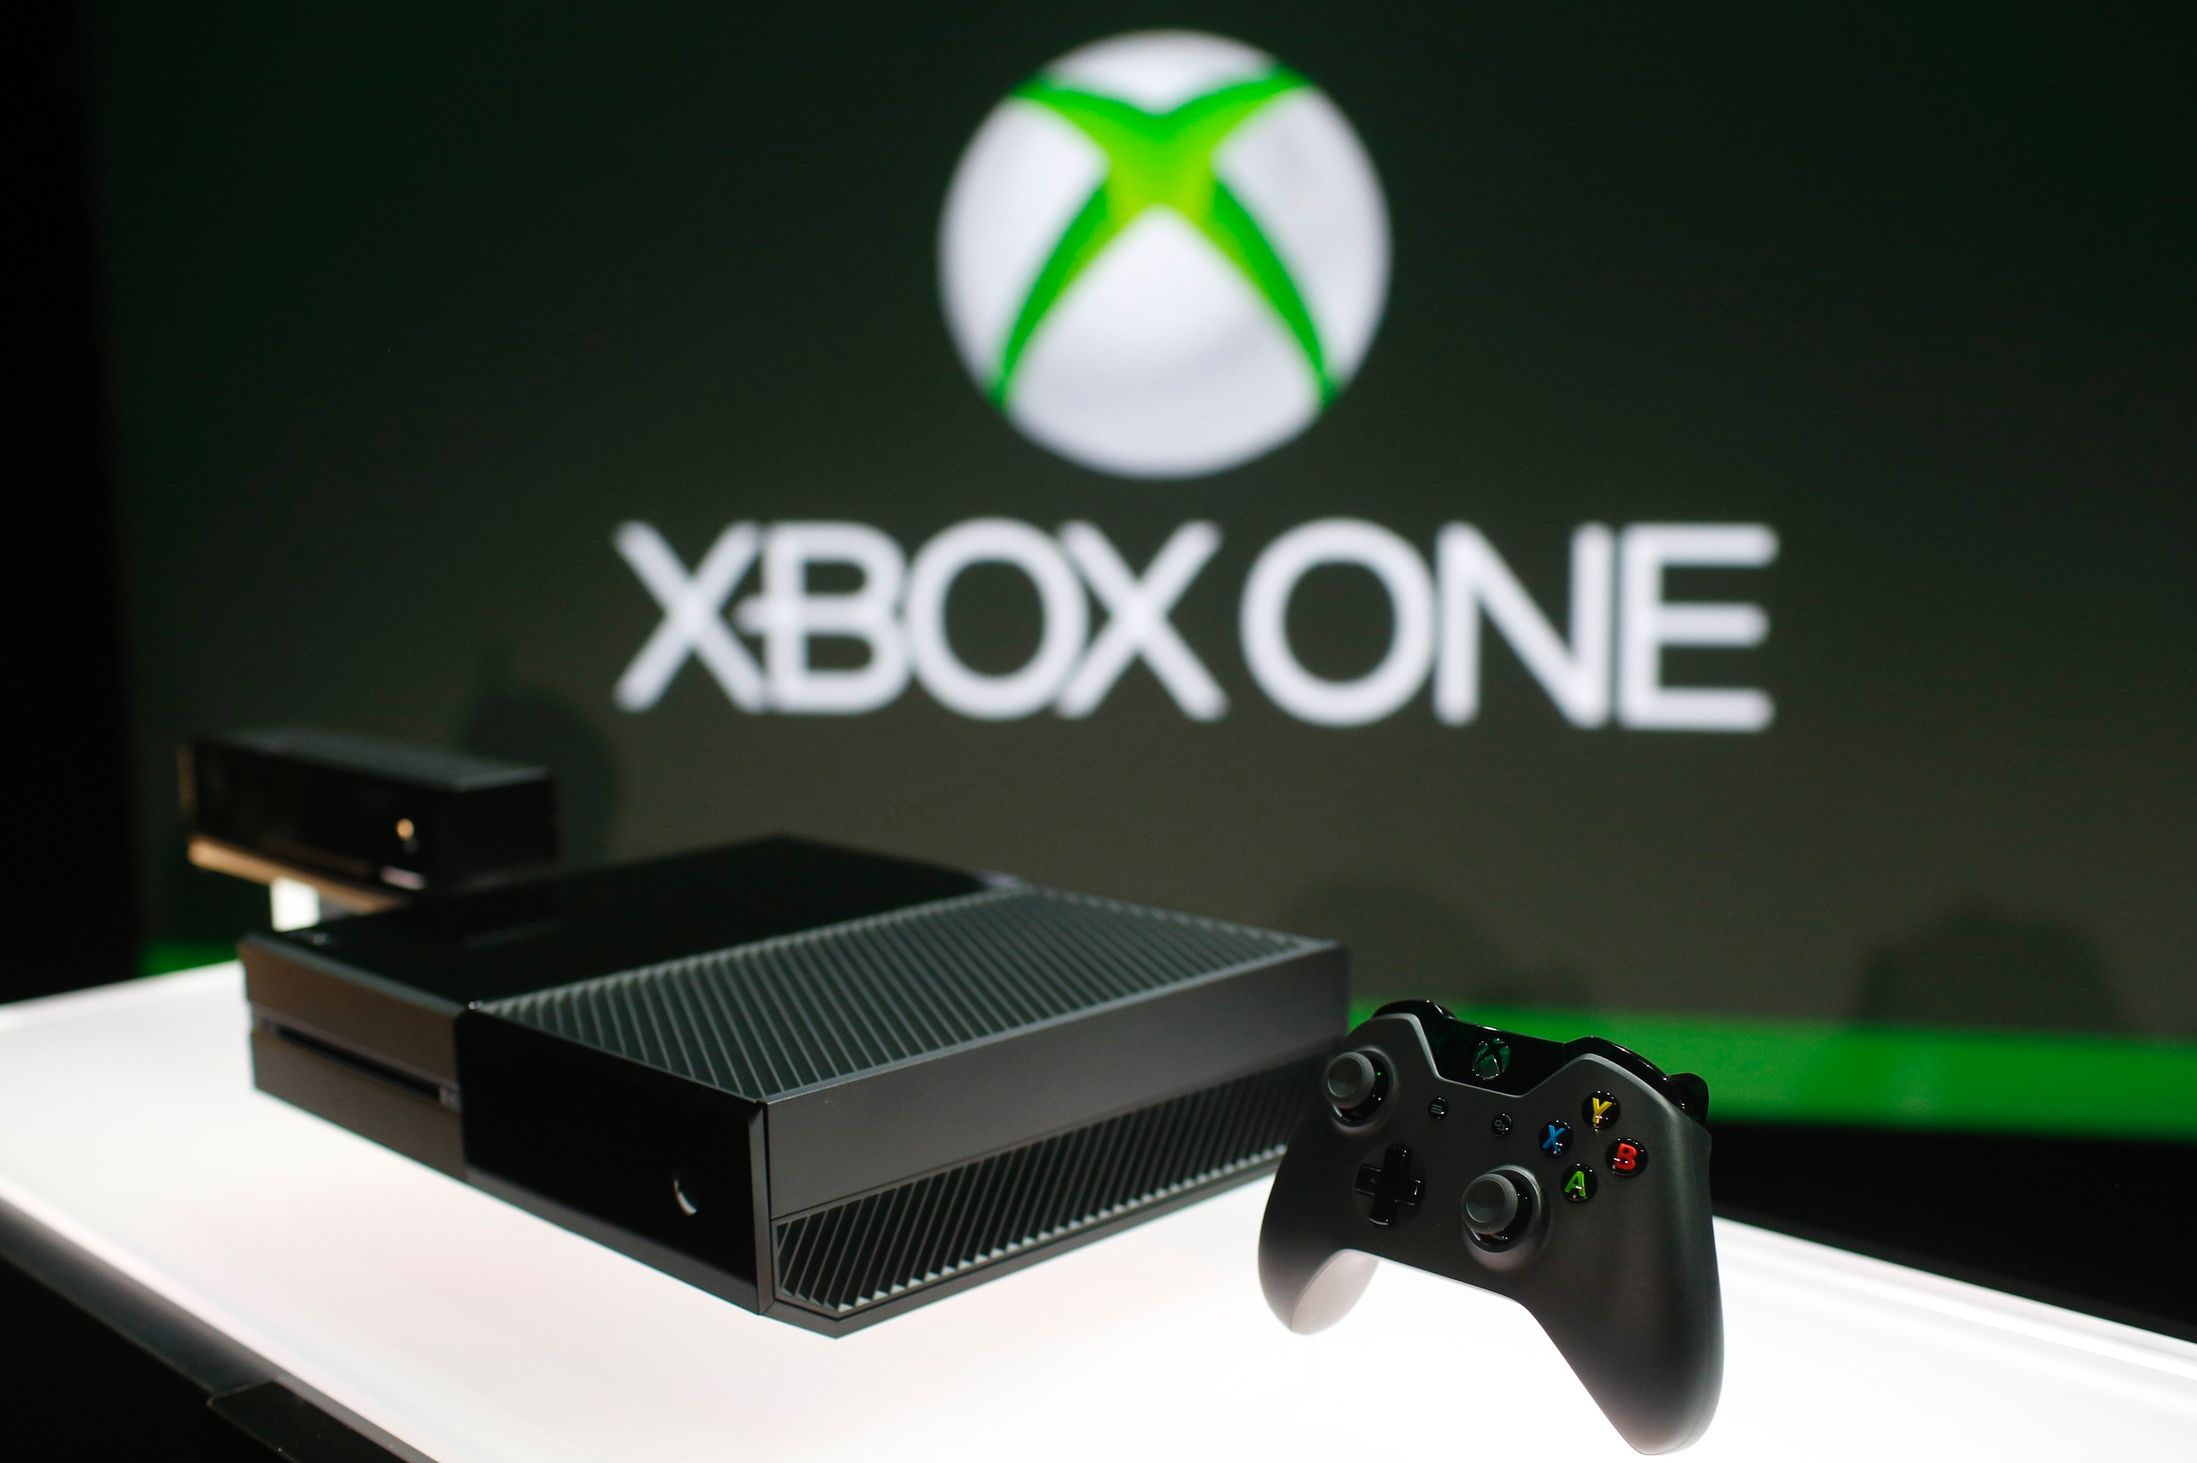 Over Two Million Xbox One Consoles Sold